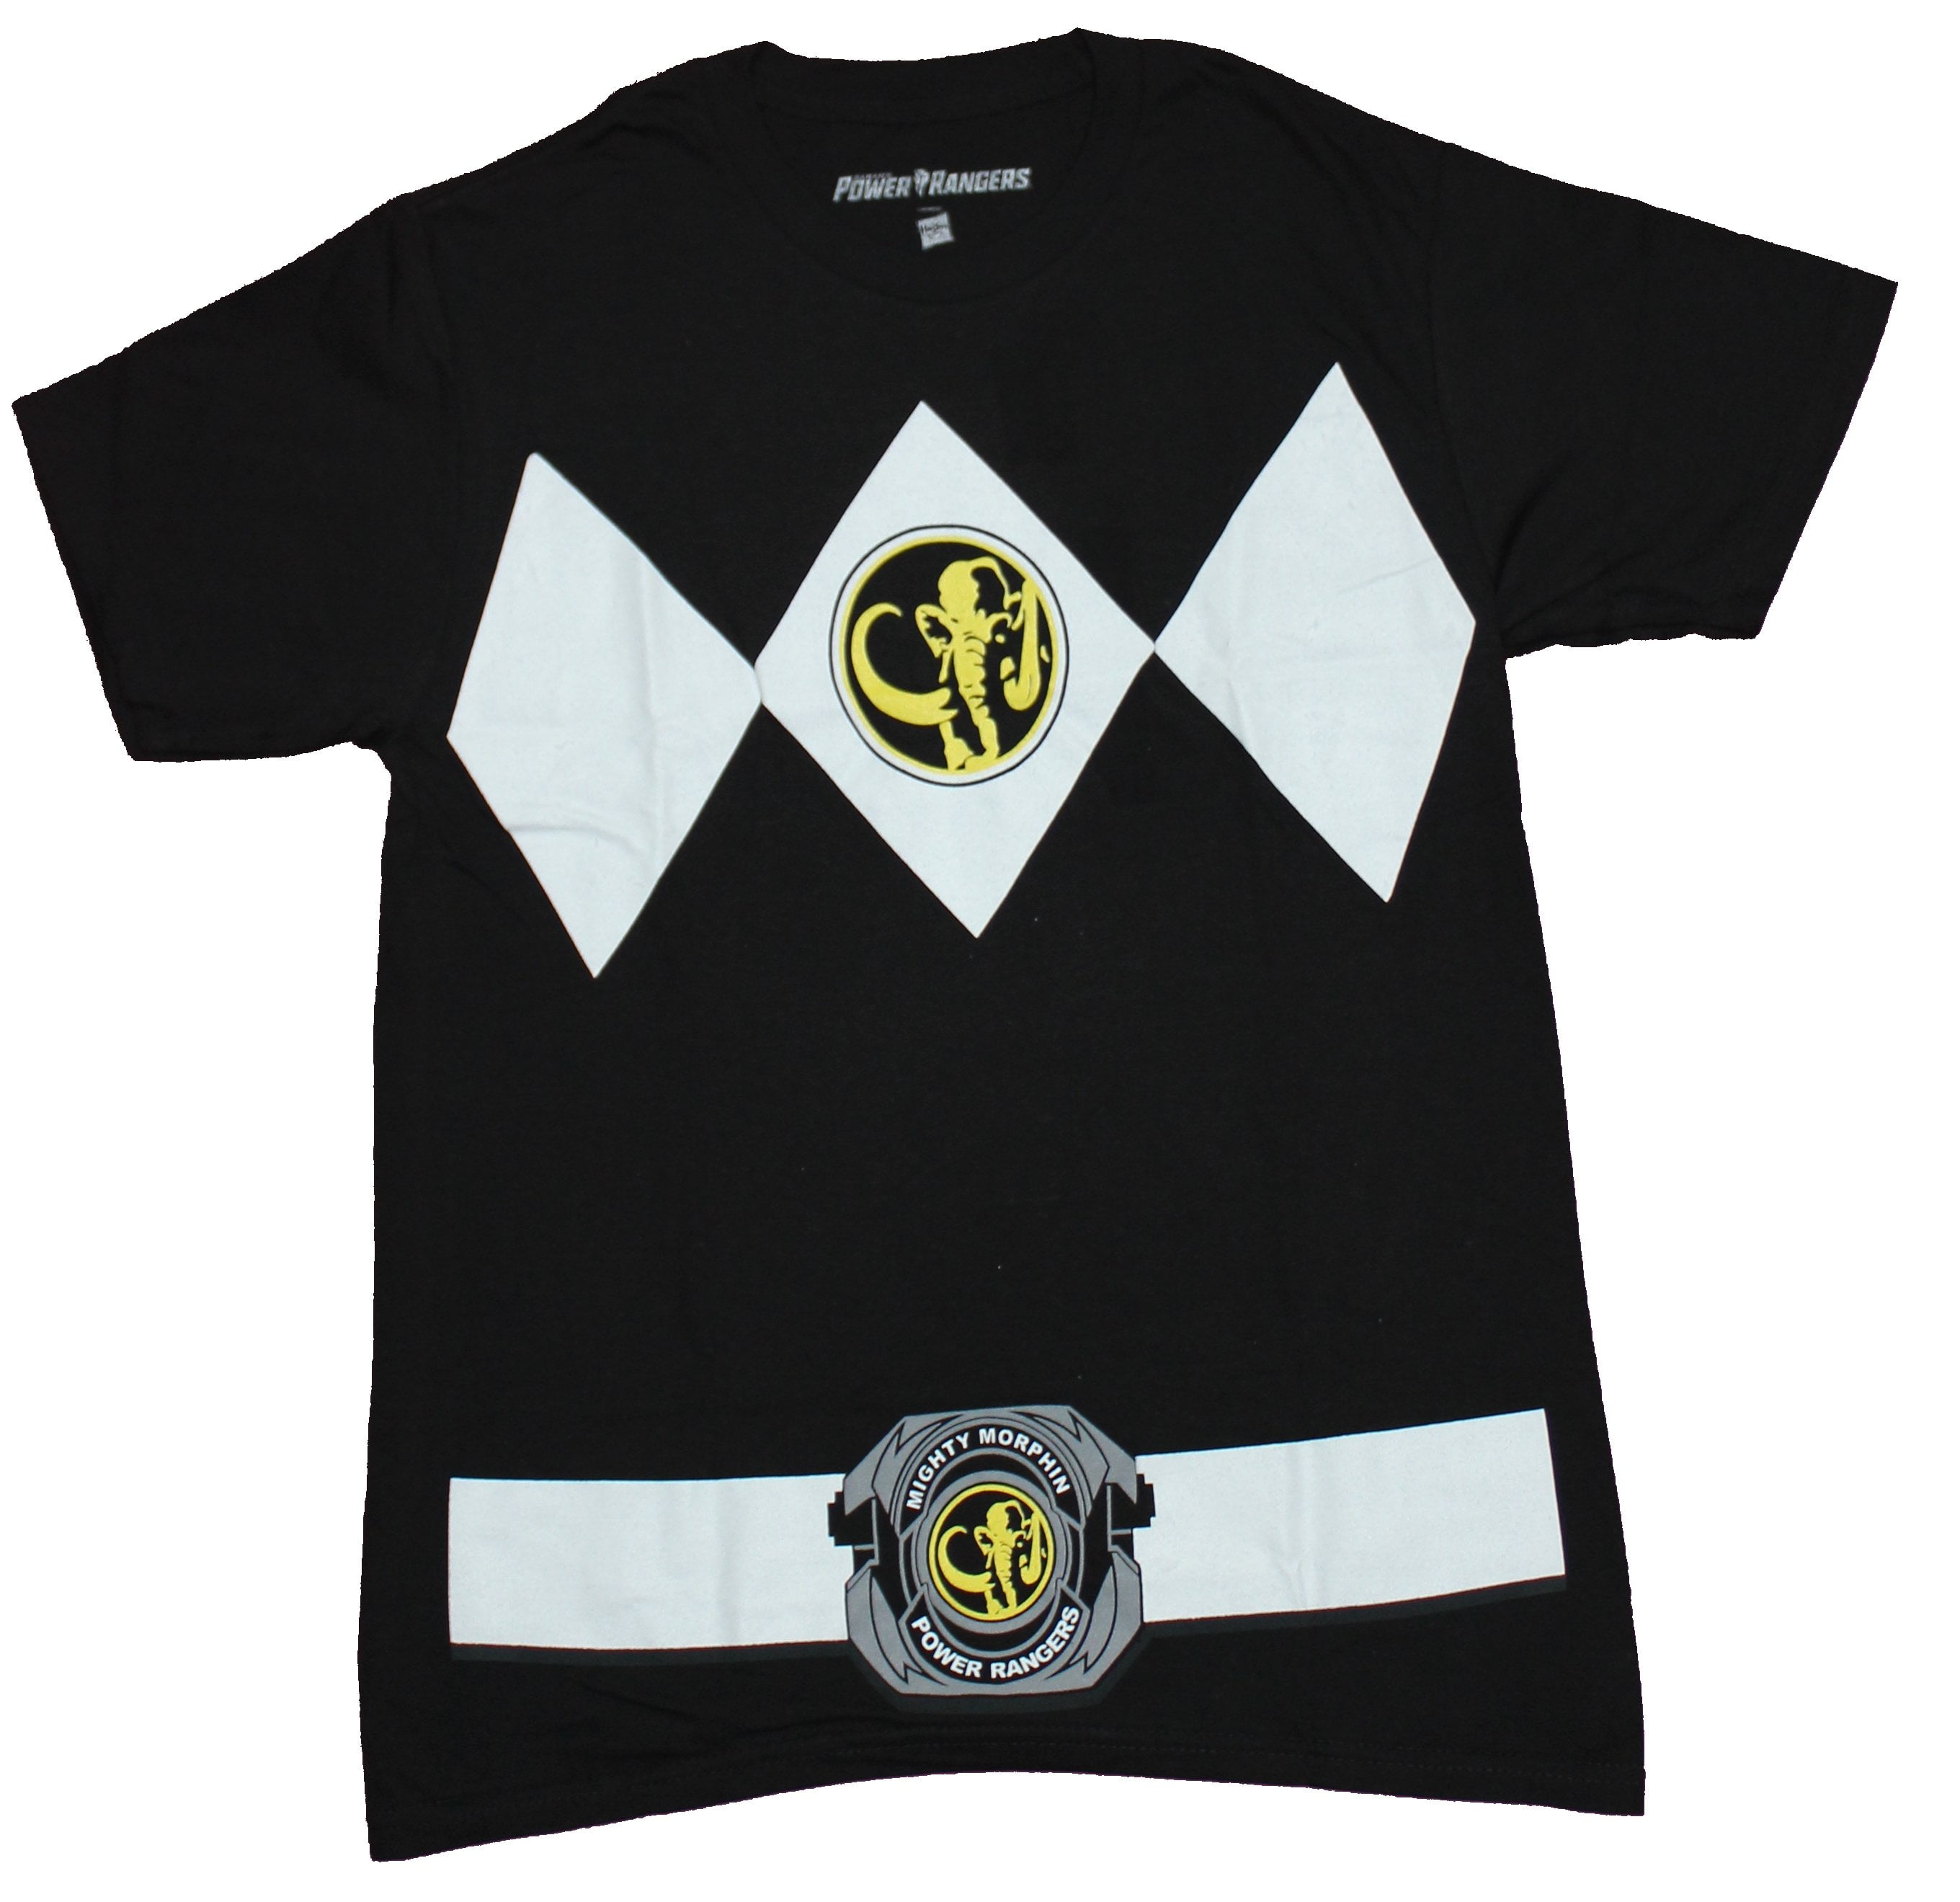 New BLACK Mighty Morphin Power Rangers YOUTH Size XL XLarge Shirt 